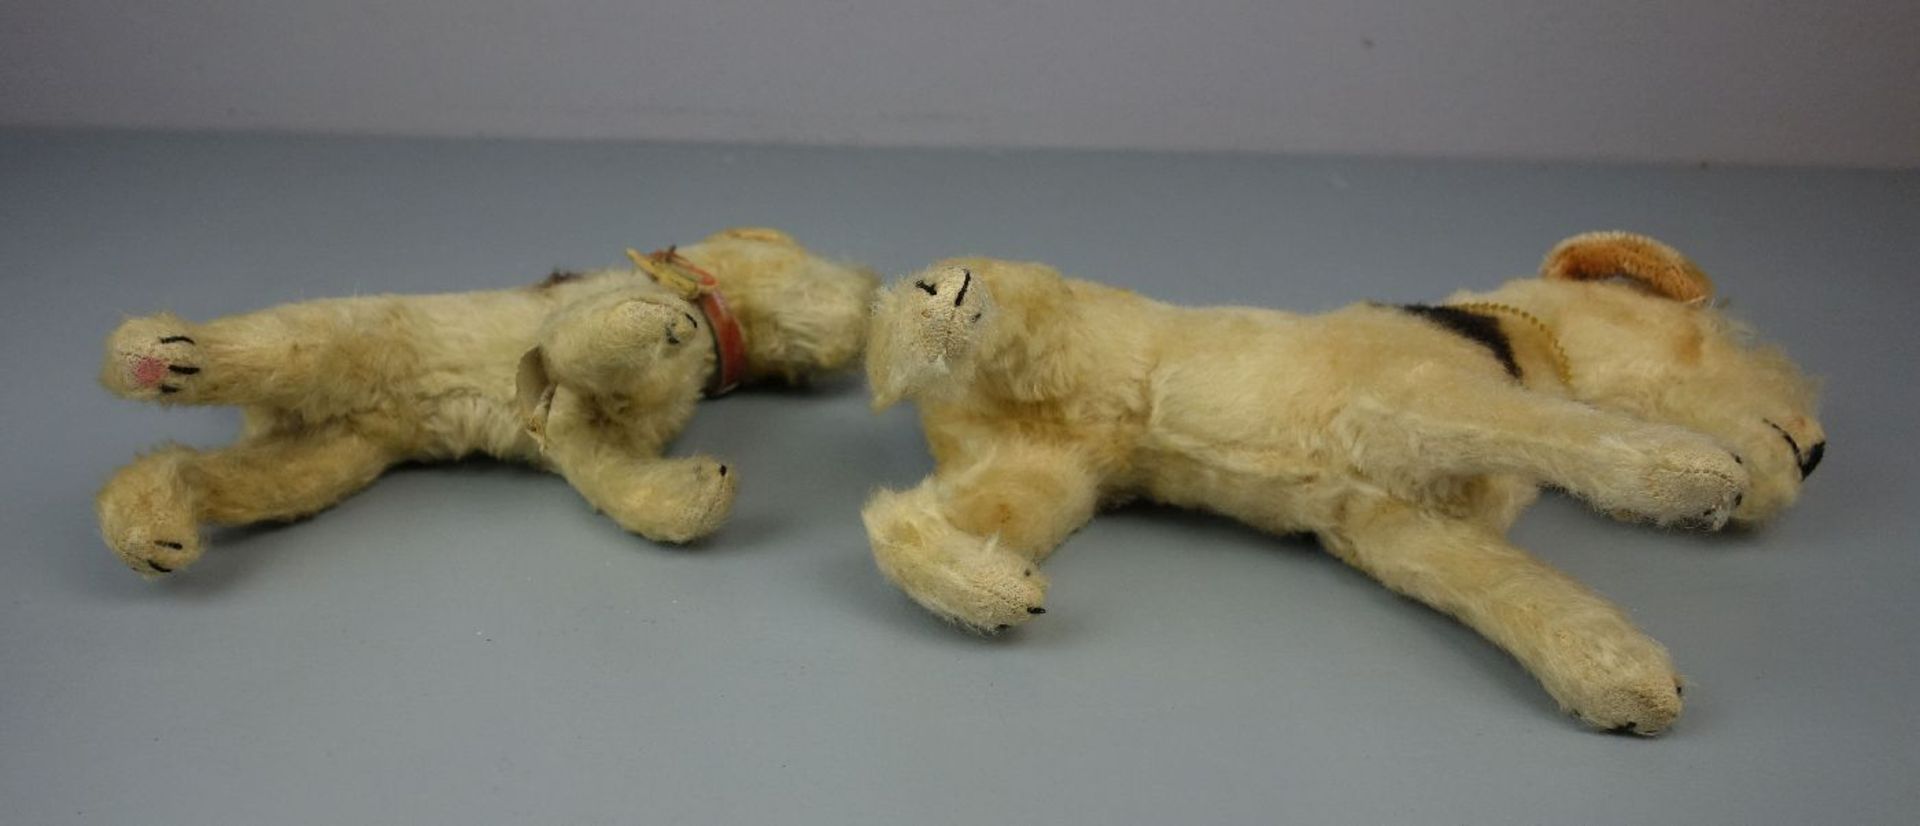 2 PLÜSCHTIERE: TERRIER / HUNDE / two cuddle toy dogs, um 1955. 1) Steiff-Hund "Foxy", Mohair, an - Image 6 of 7